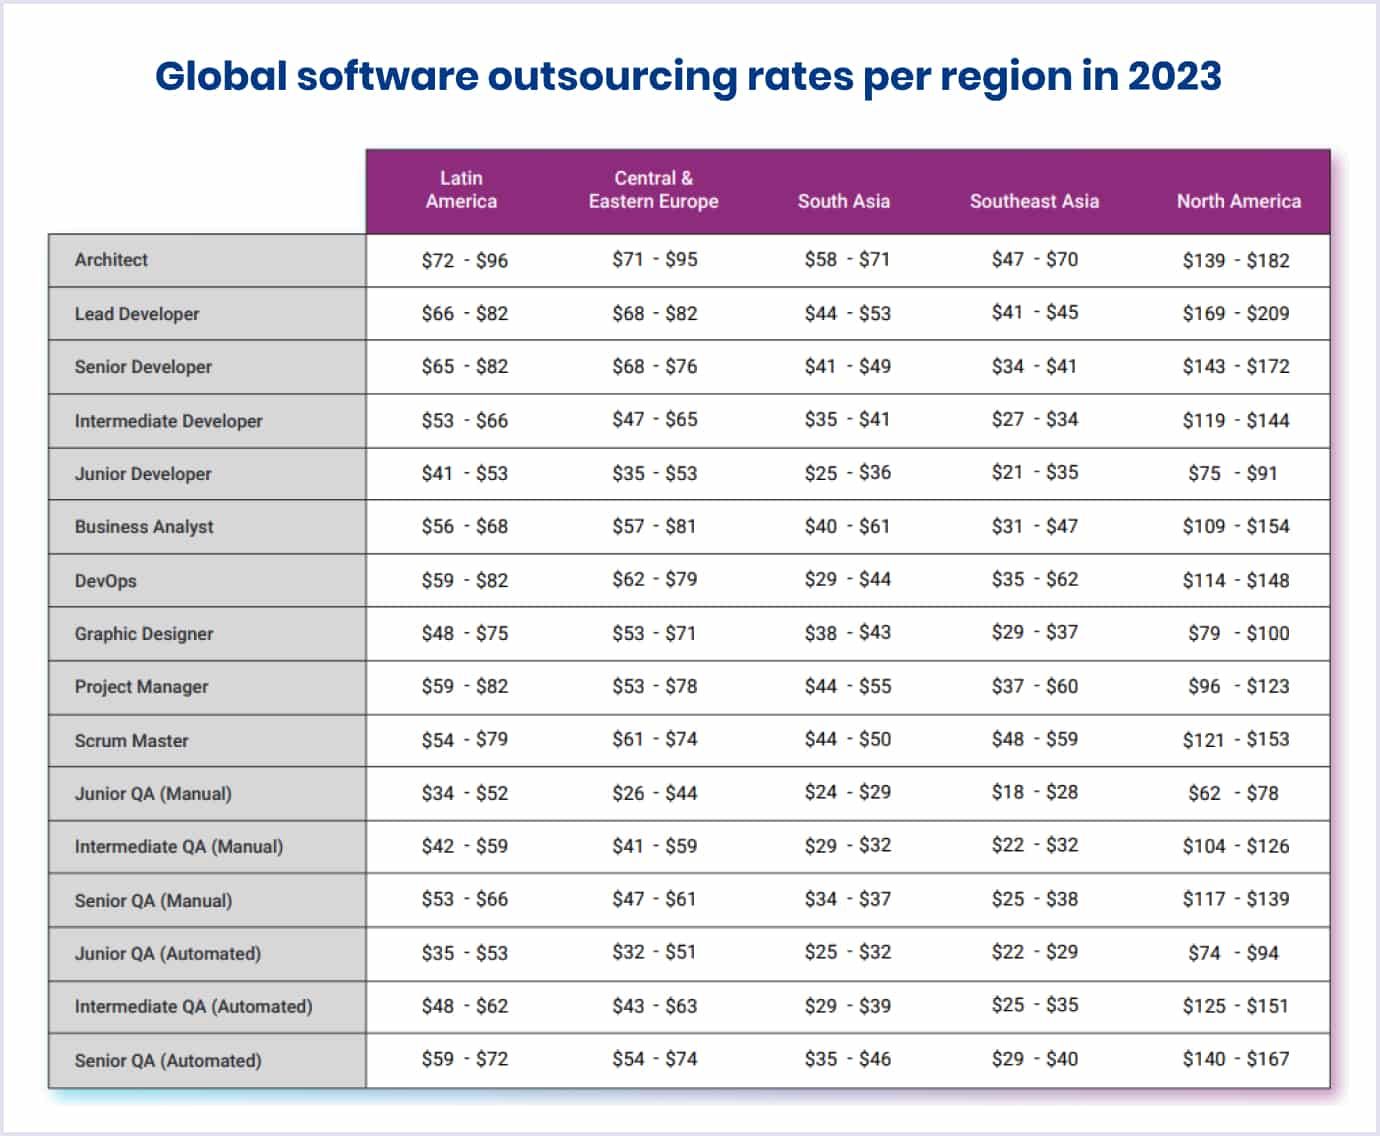 2023 global software outsourcing rates per region